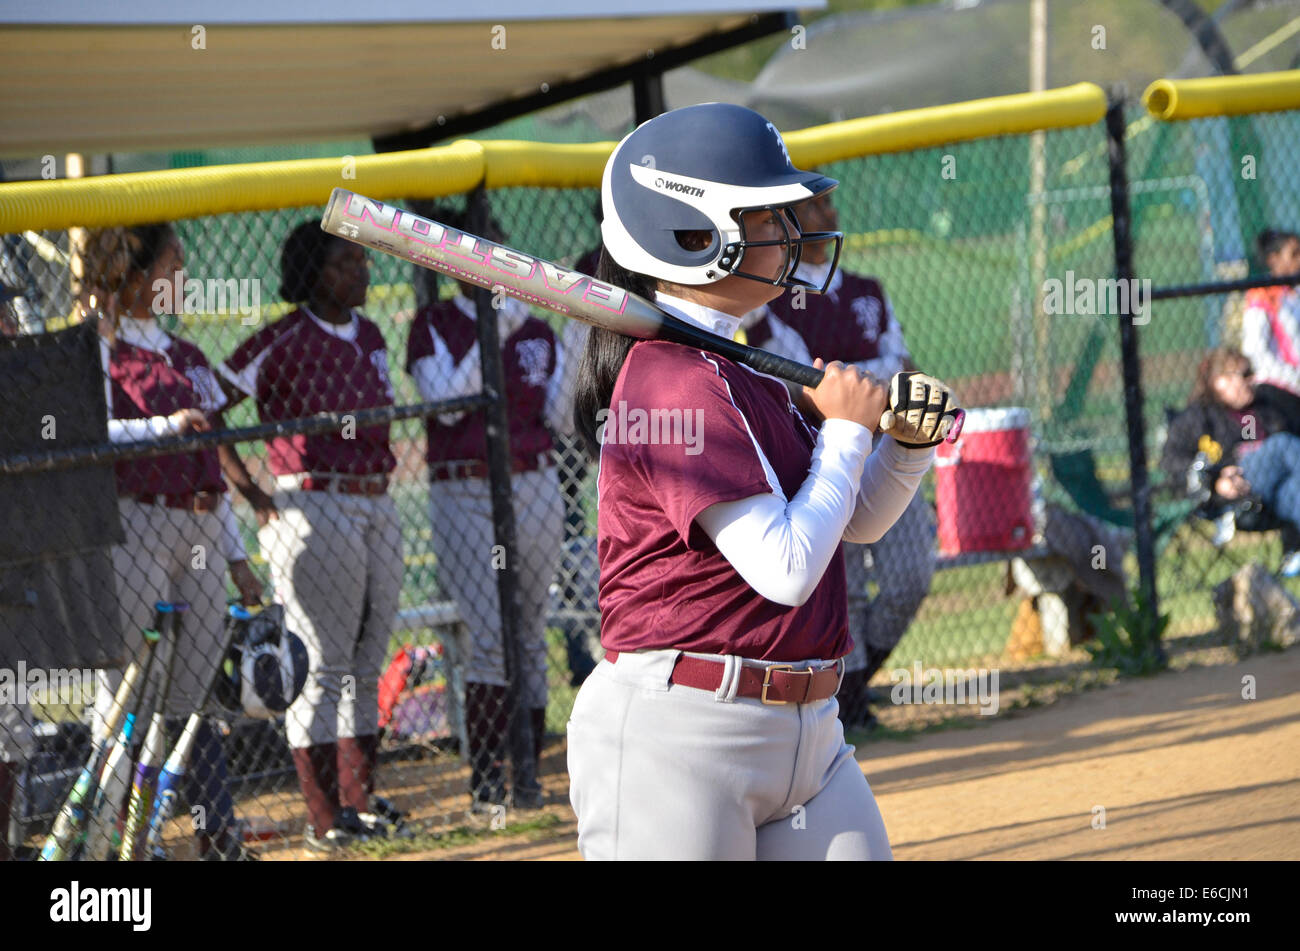 High school softball batter in Bowie, Maryland Stock Photo